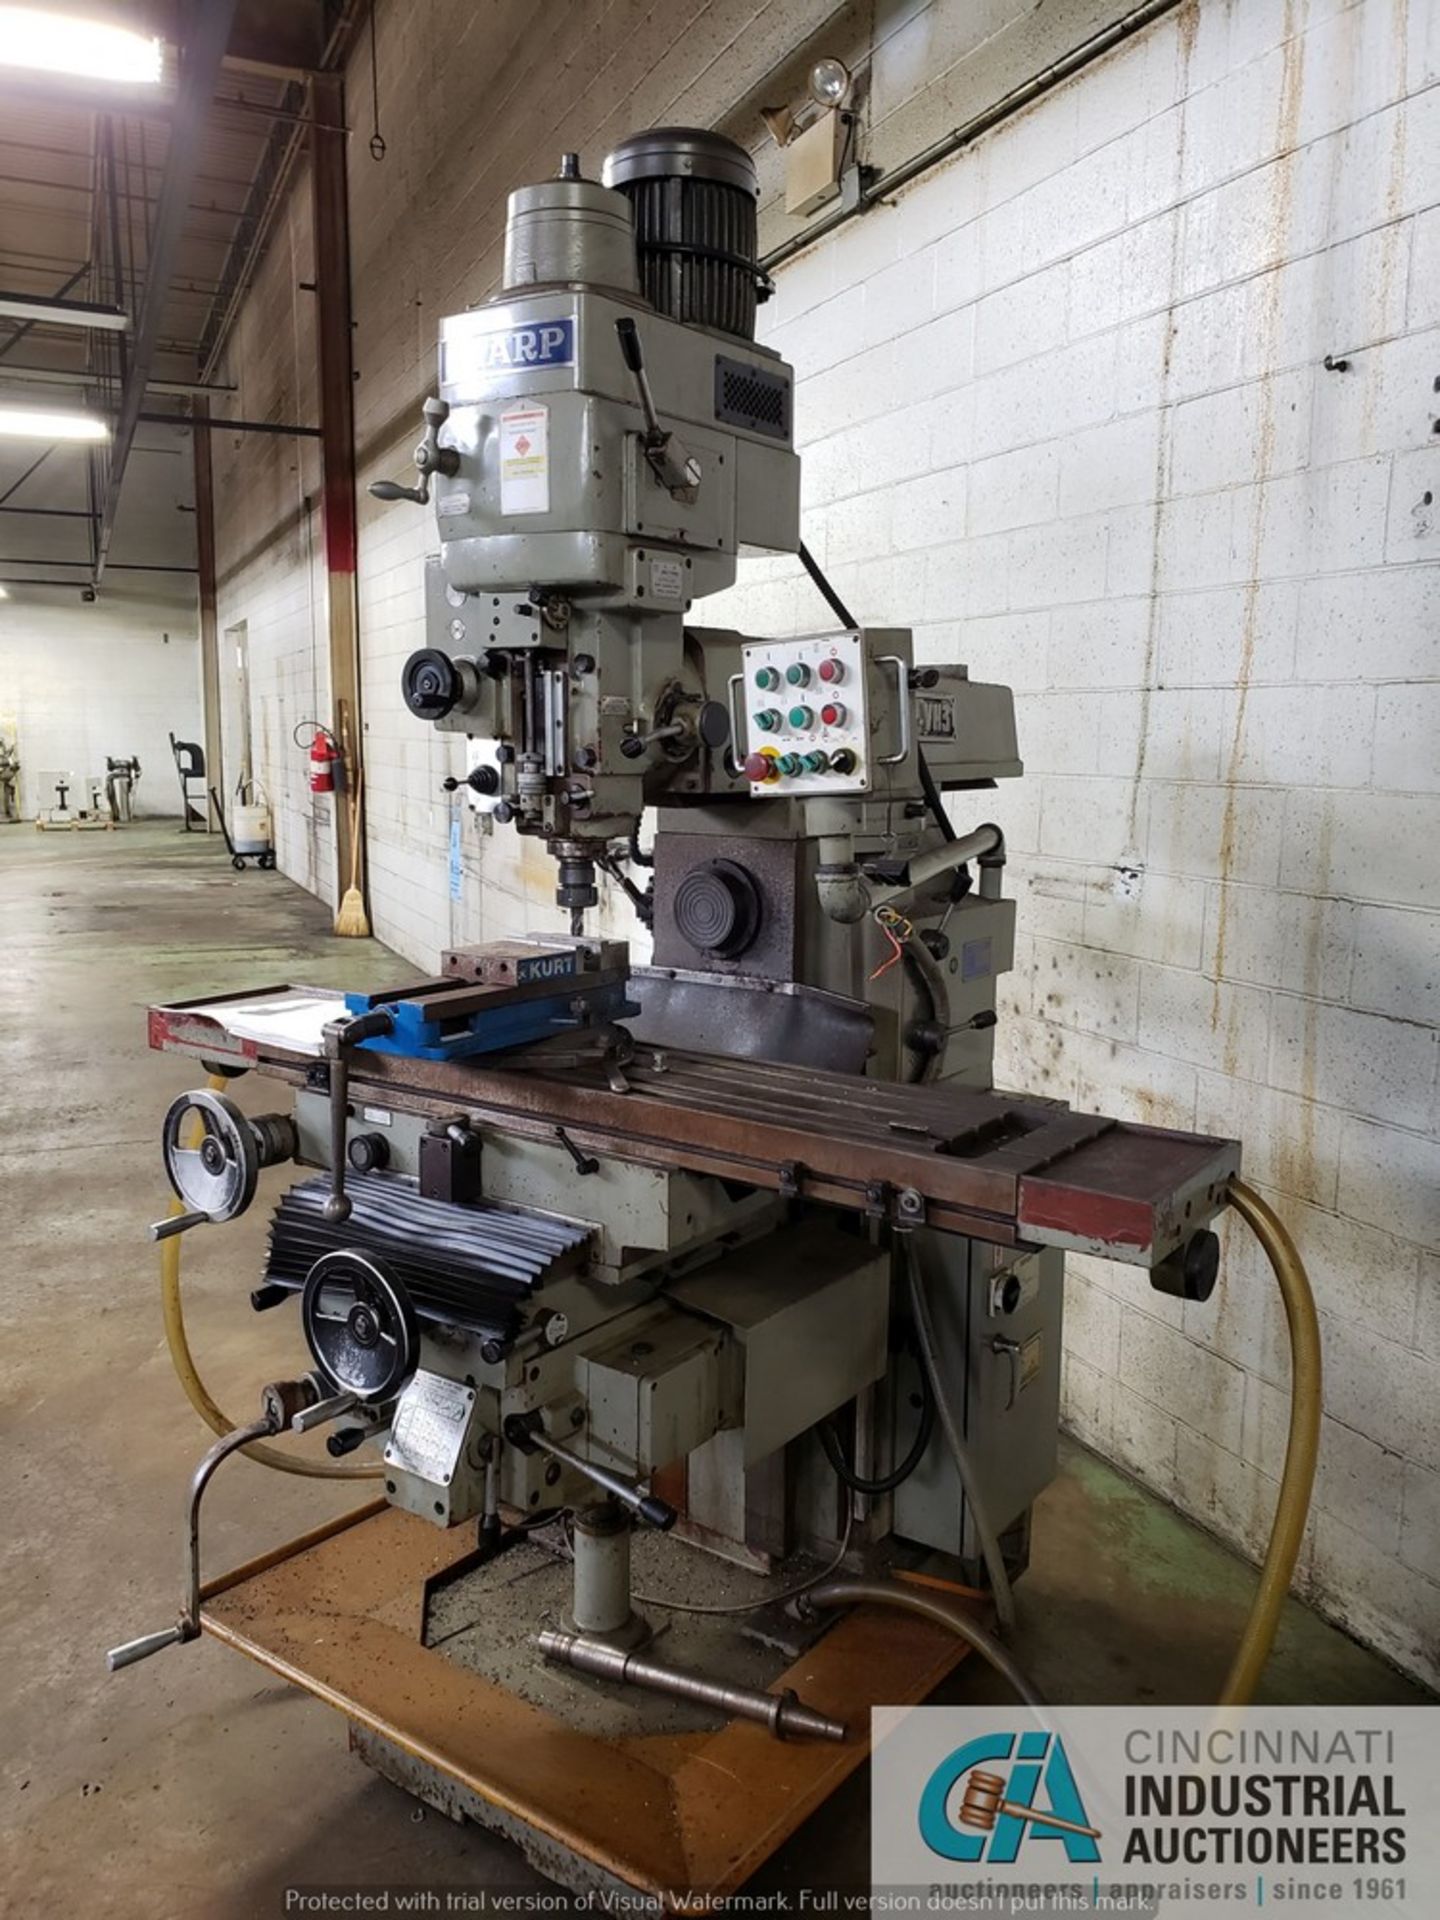 SHARPE MODEL VH3 VERTICAL MILLING MACHINE; S/N 2B399, 12" X 52" TABLE, SPINDLE SPEED 35-1,700 RPM, - Image 2 of 10